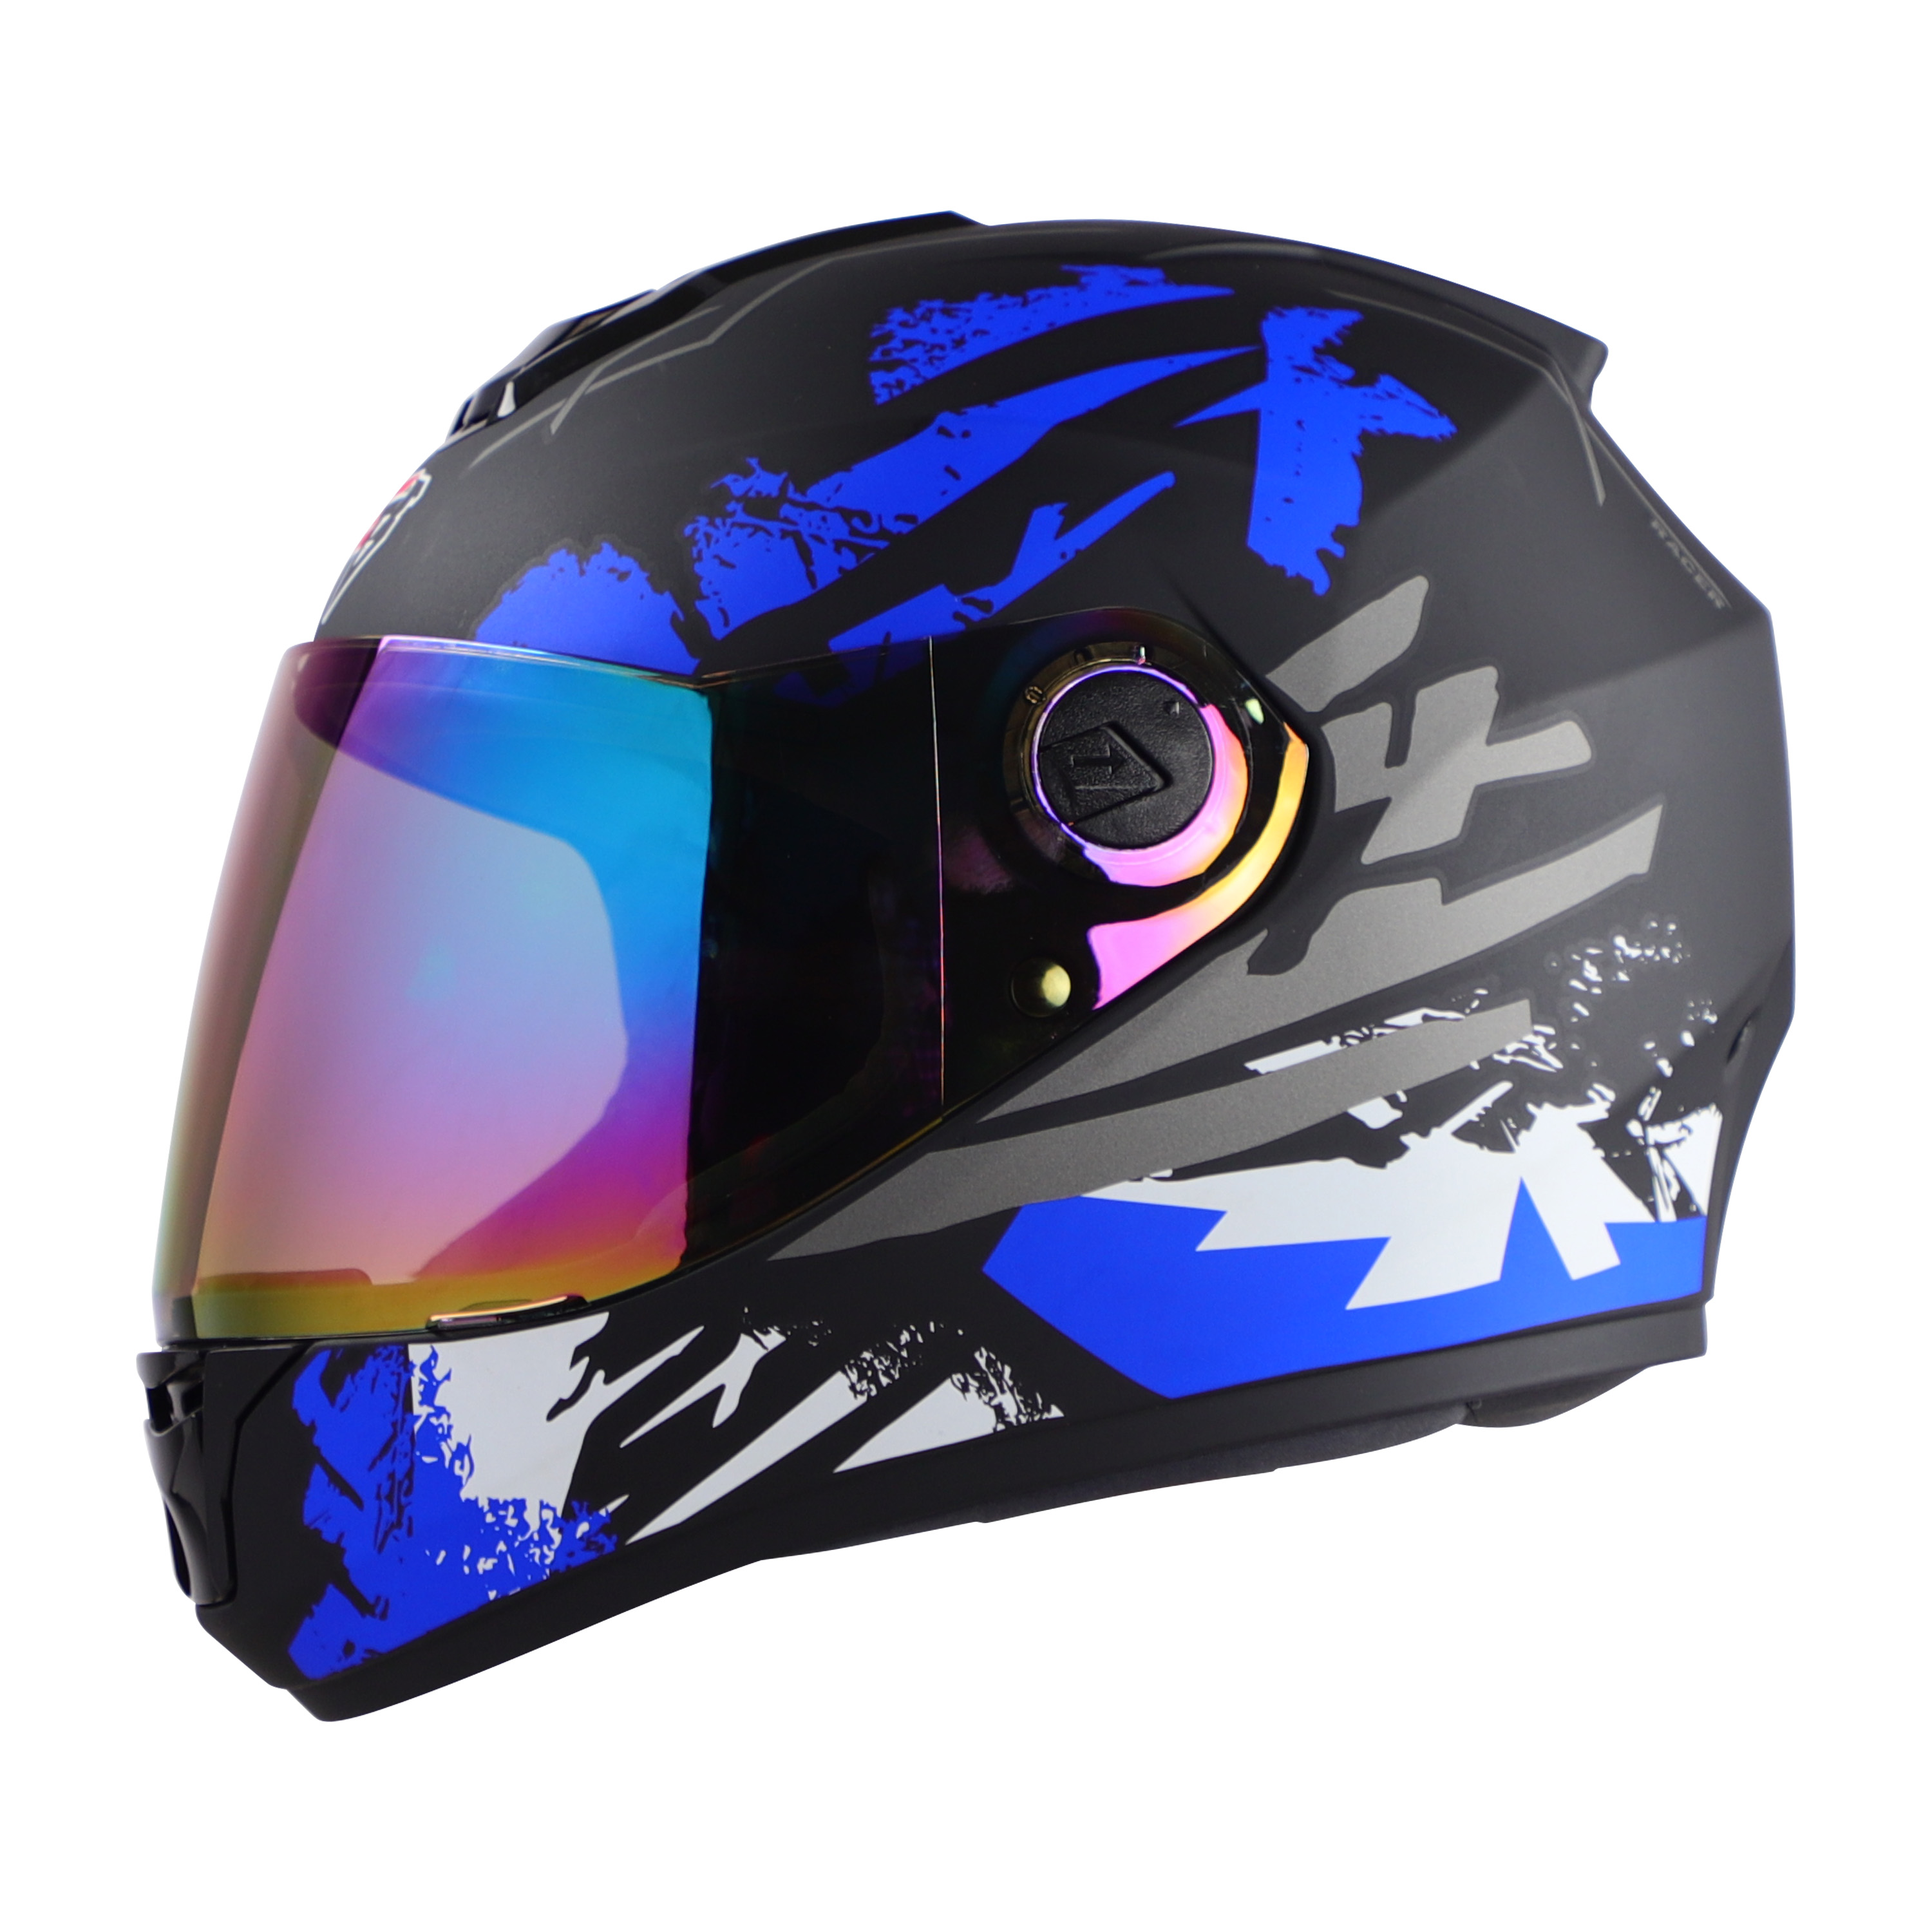 Steelbird SBH-11 Zoom Racer ISI Certified Full Face Graphic Helmet for Men and Women (Glossy Black Blue with Chrome Rainbow Visor)